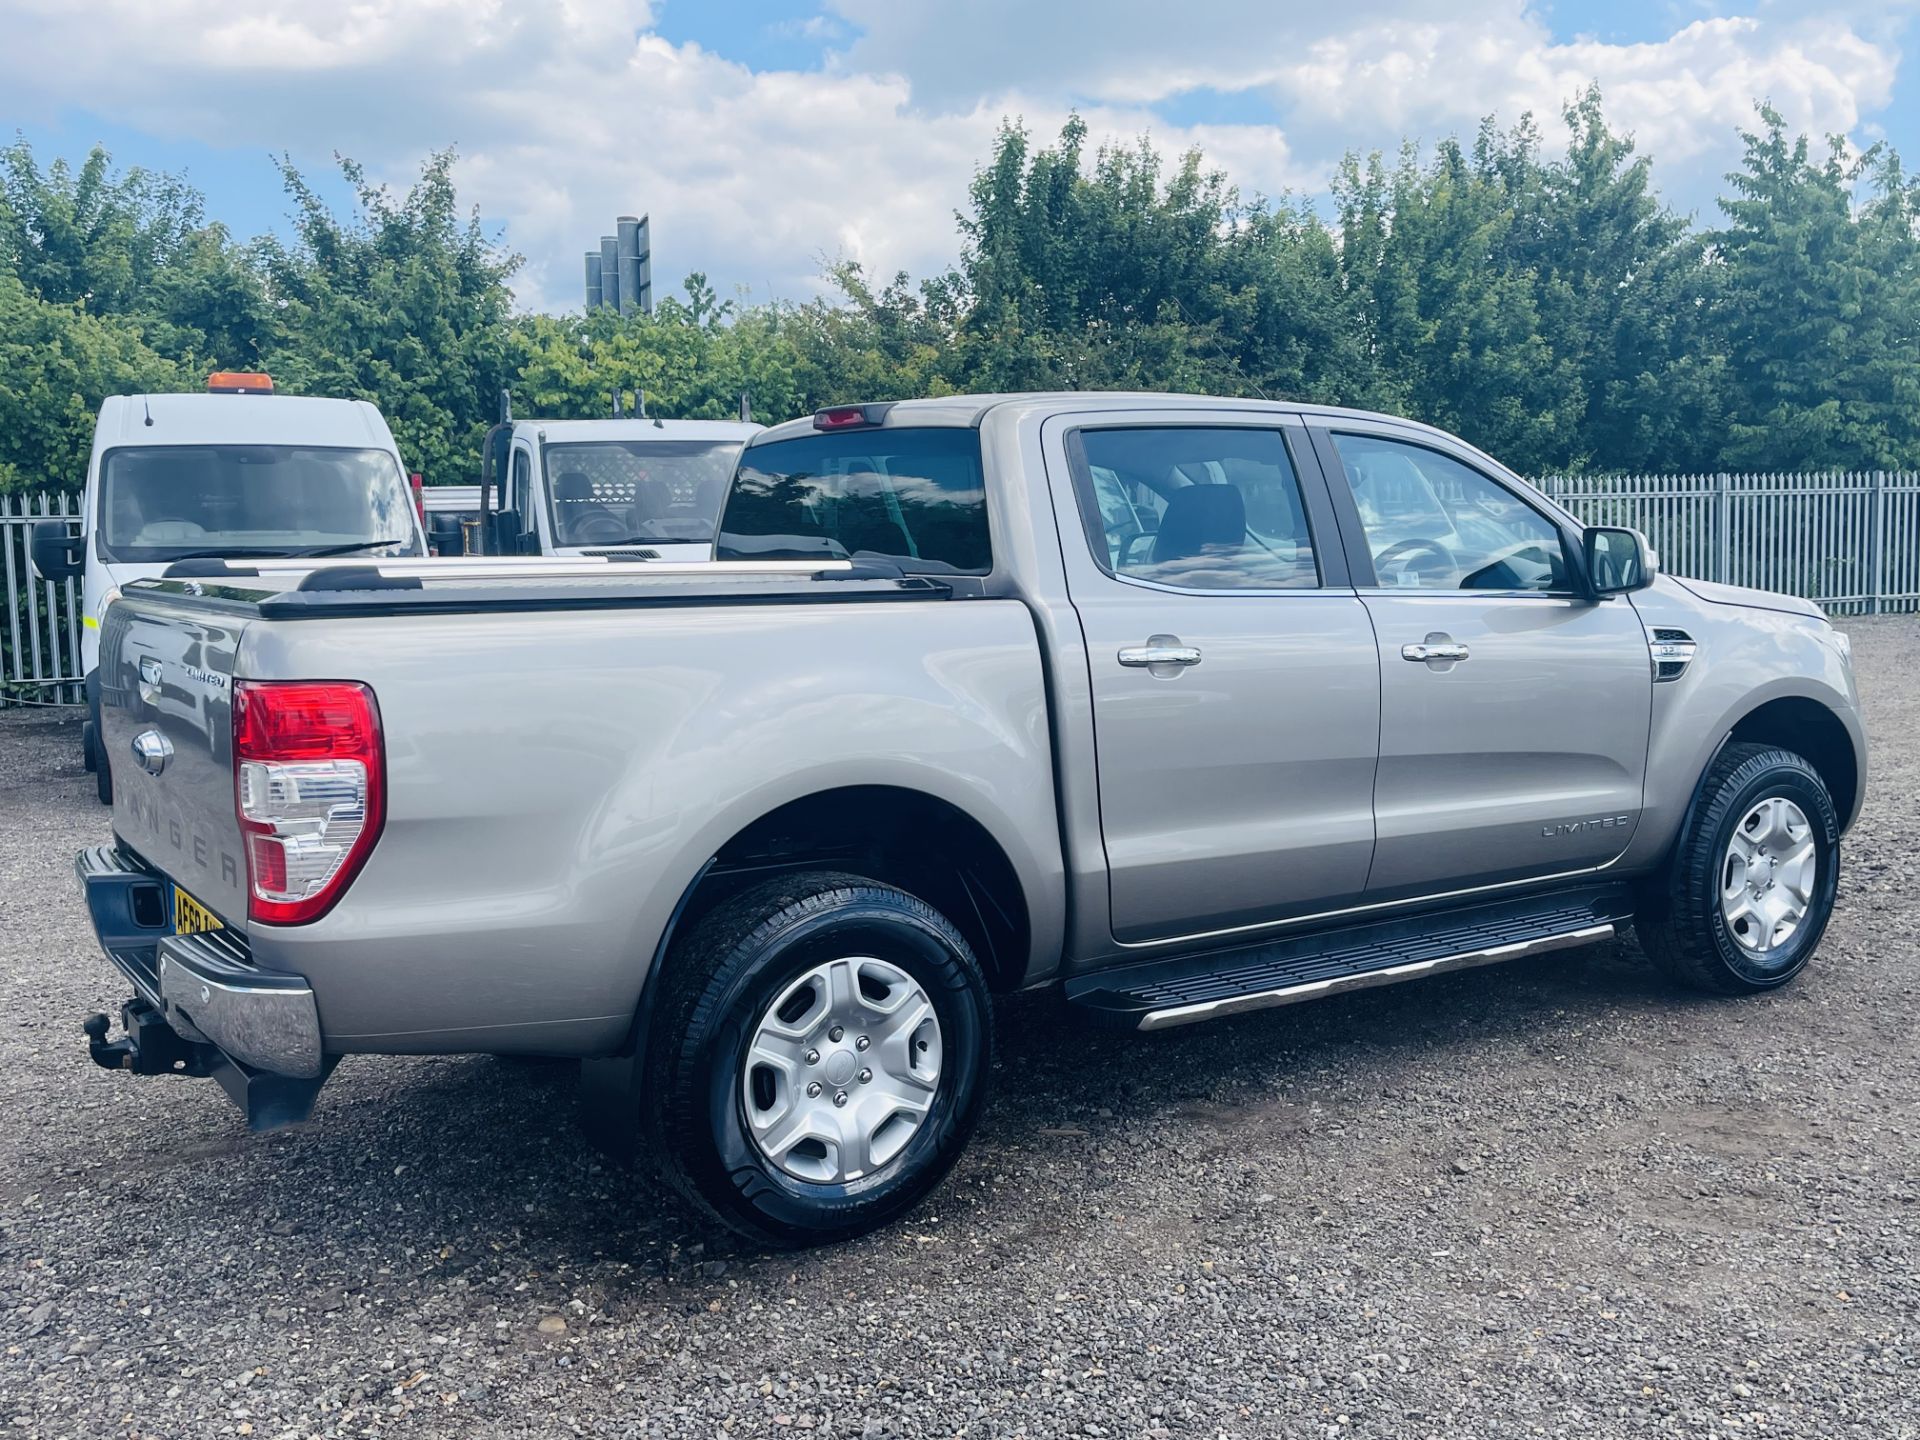 ** ON SALE ** Ford Ranger 3.2 TDCI Limited 2018 '68 Reg' Auto 4WD - Sat Nav - A/C - Euro 6 - Image 13 of 35